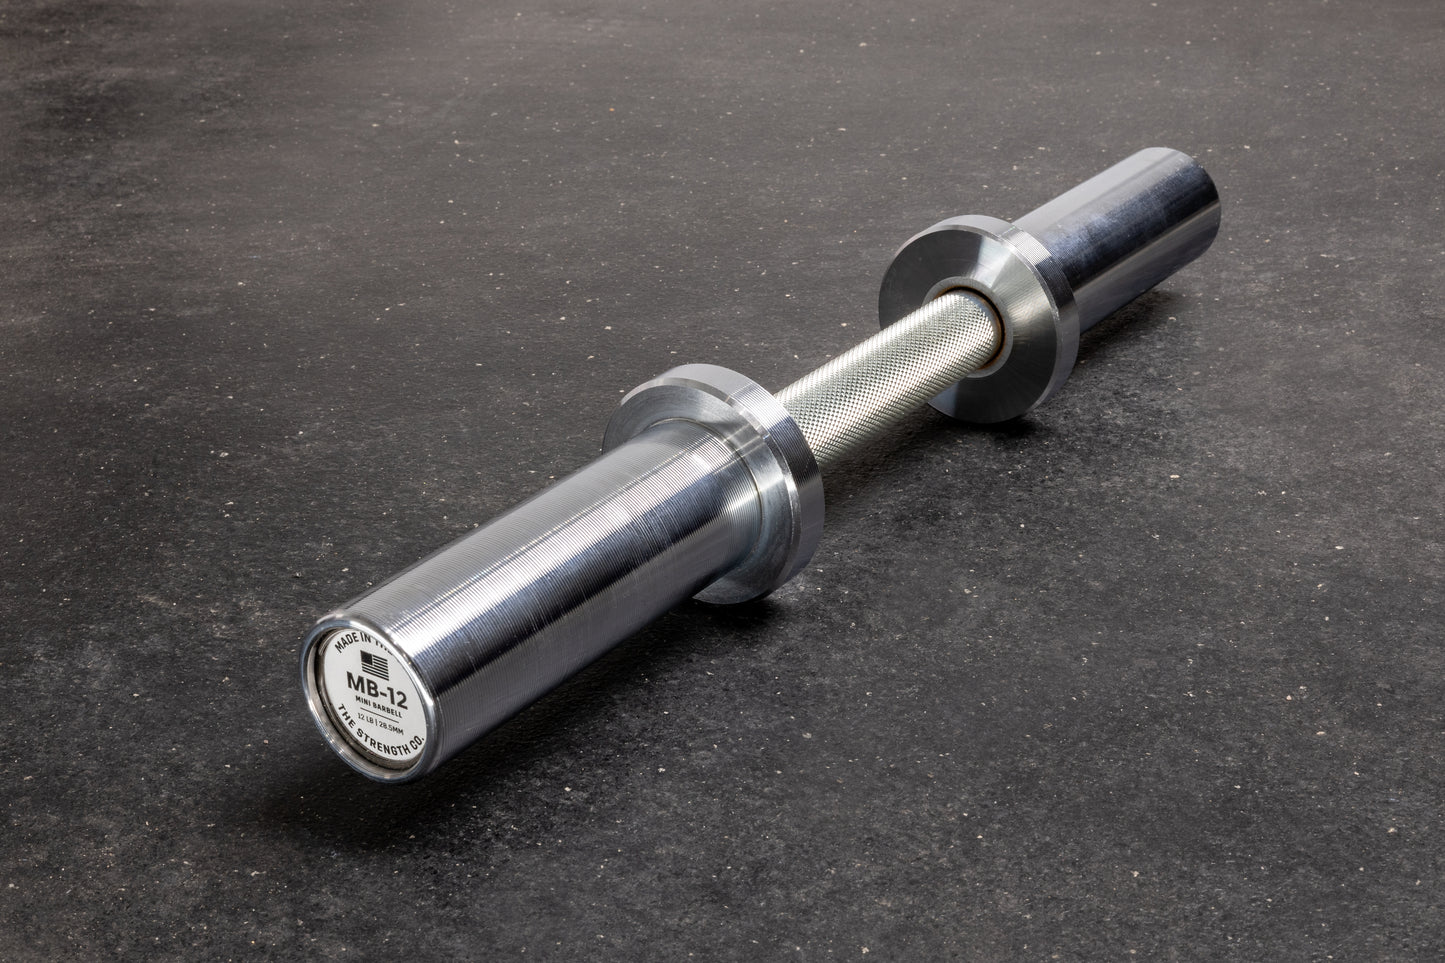 Loadable Dumbbell - Made In USA